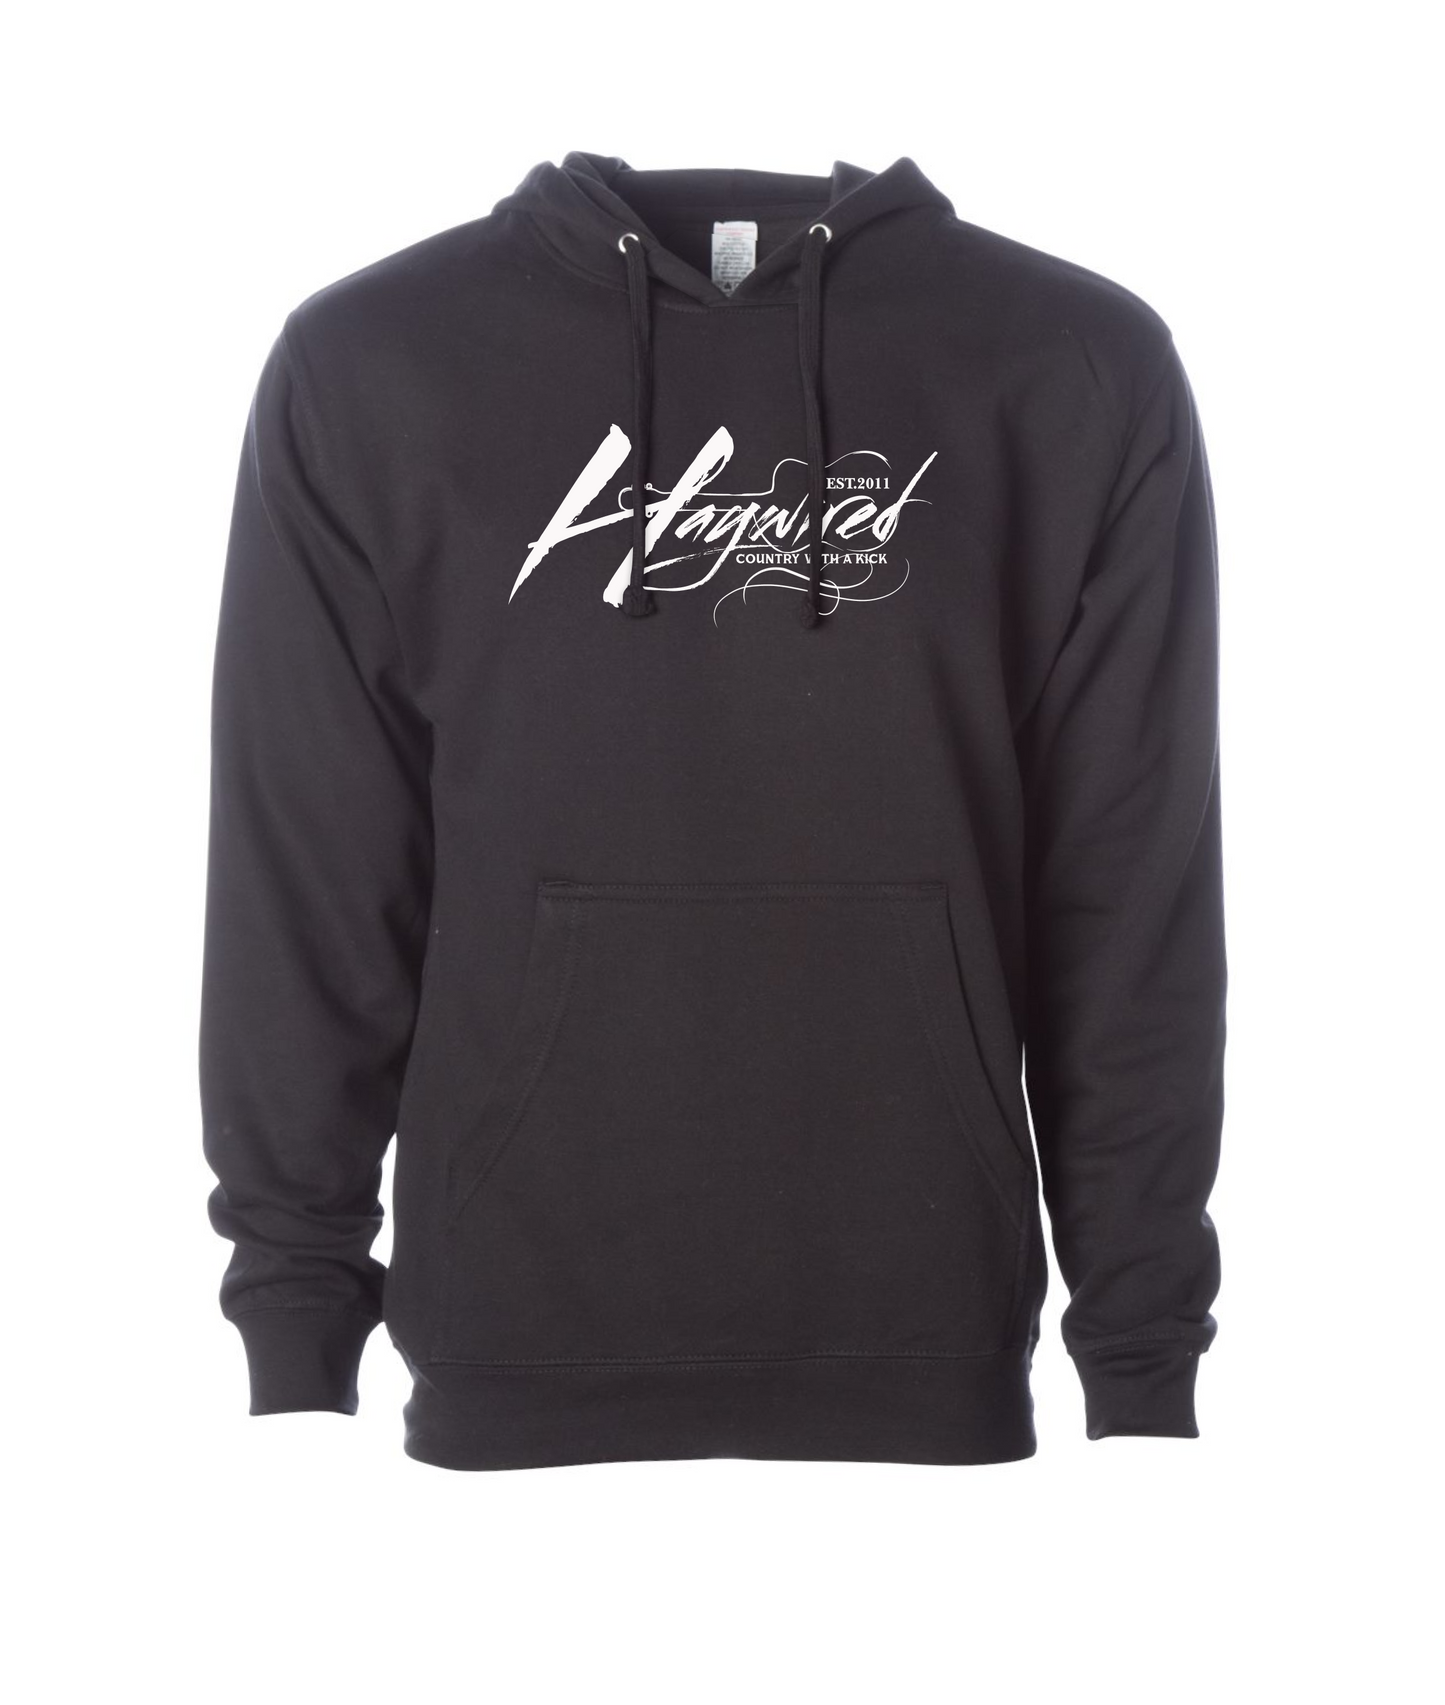 Haywired - Country With a Kick Logo - Black Hoodie